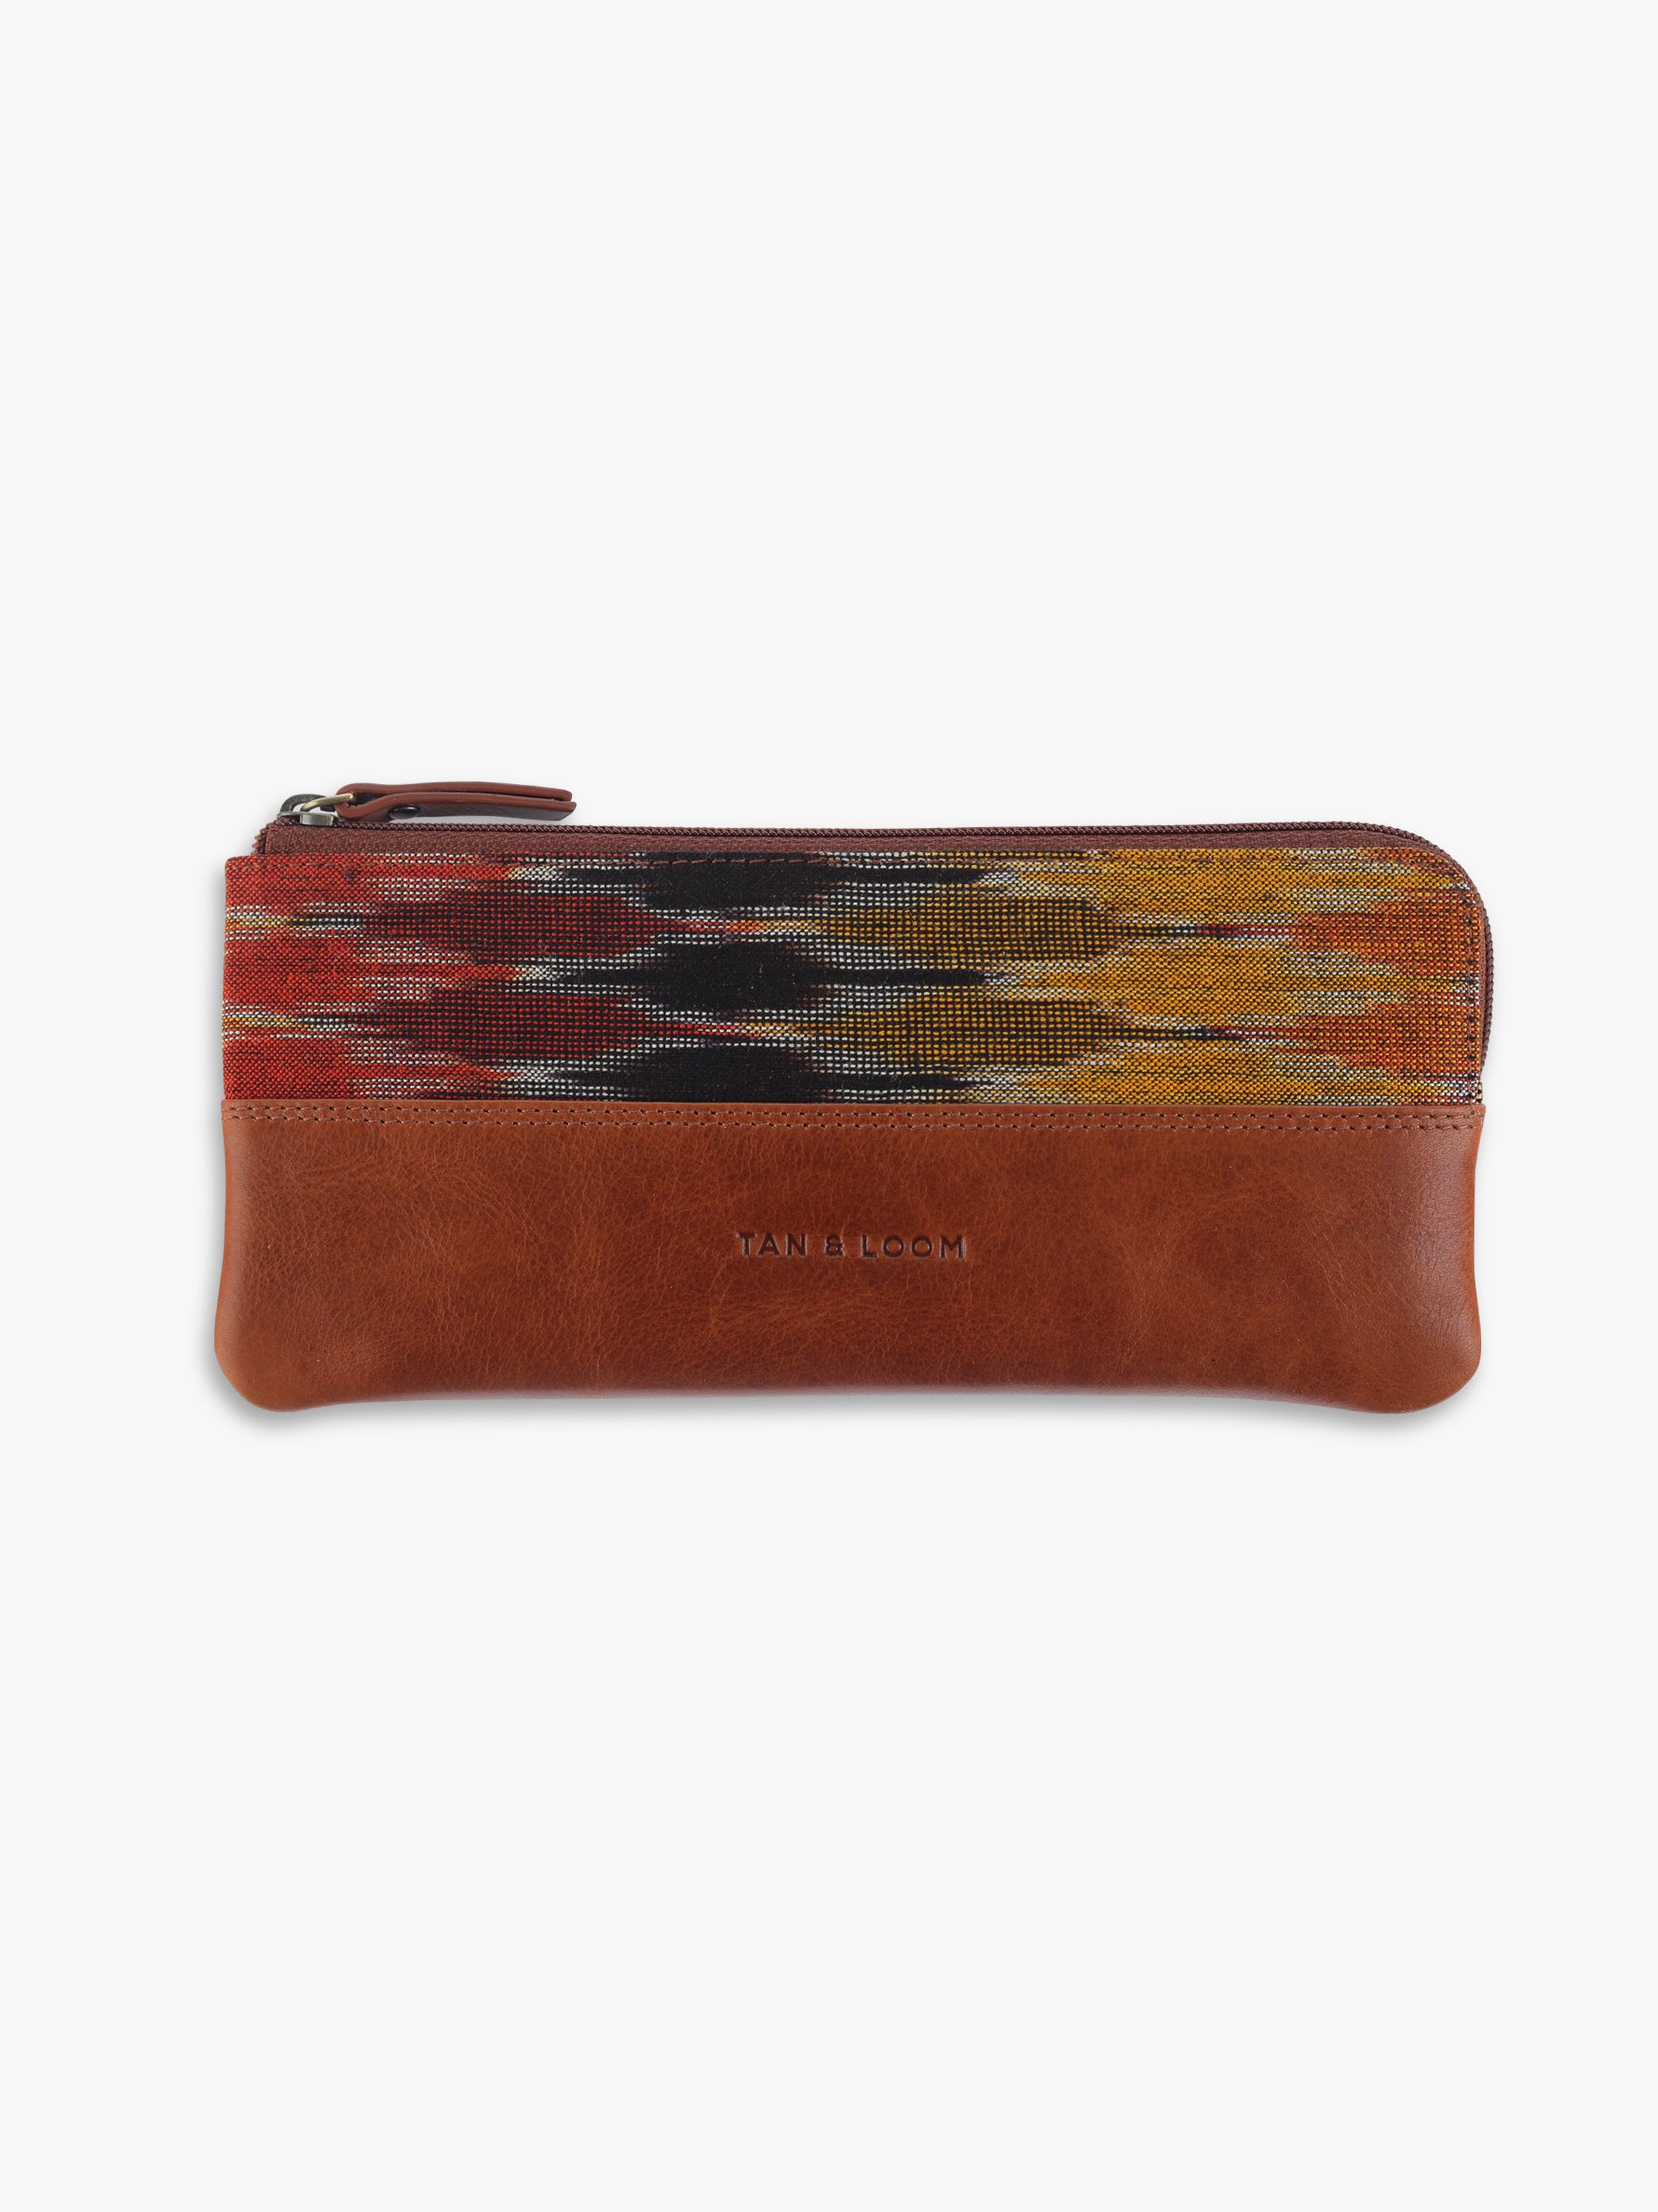 Pencil Pouch (Multi Red Ikat)